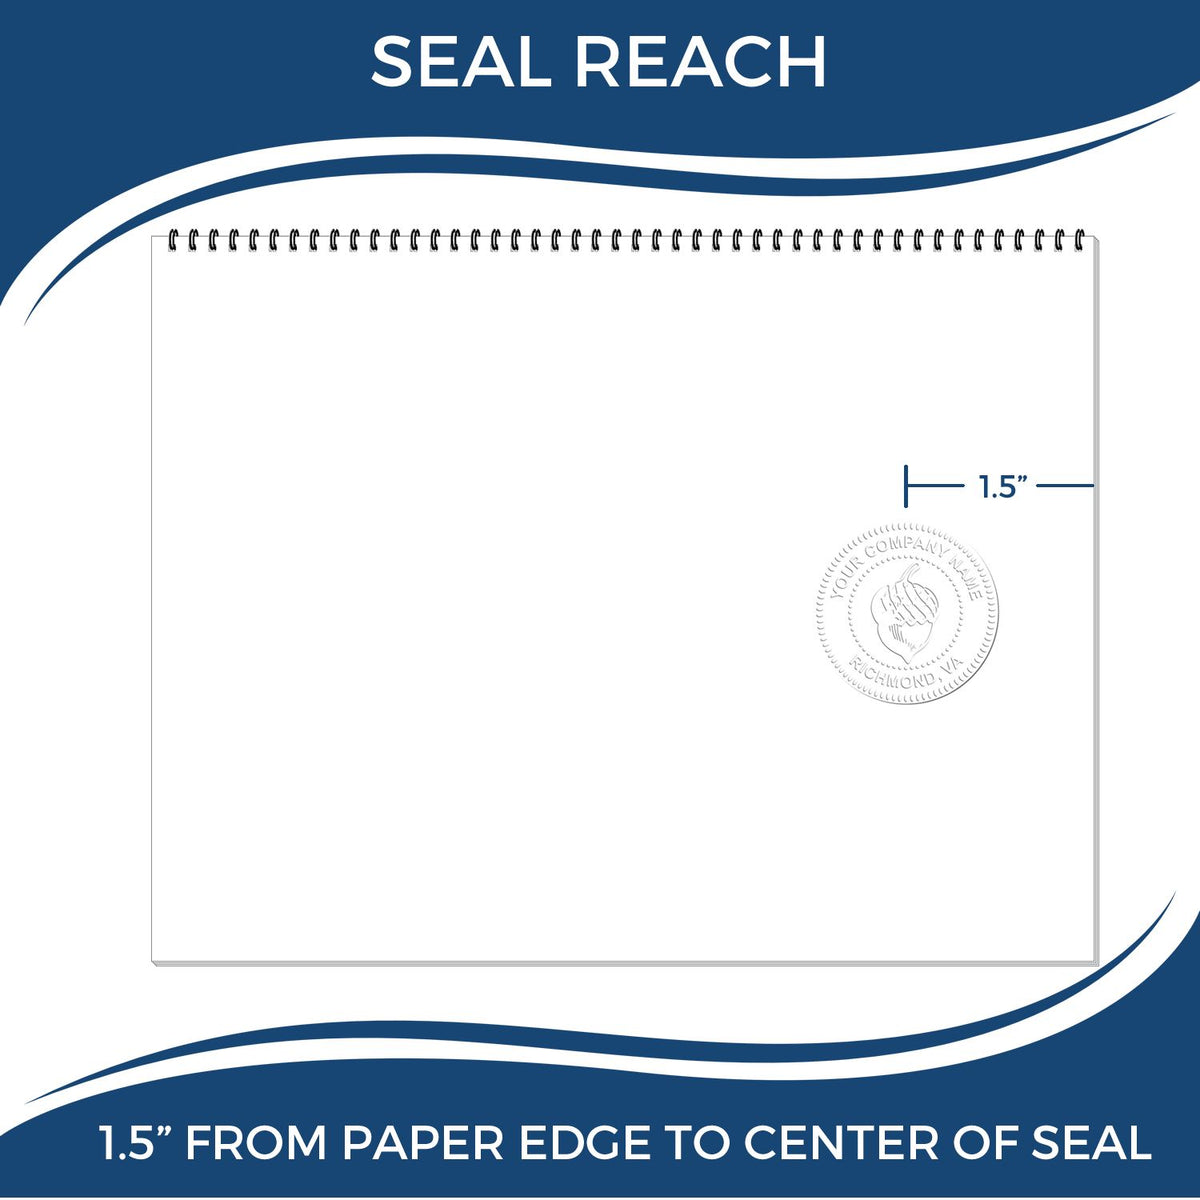 An infographic showing the seal reach which is represented by a ruler and a miniature seal image of the Hybrid Virginia Architect Seal